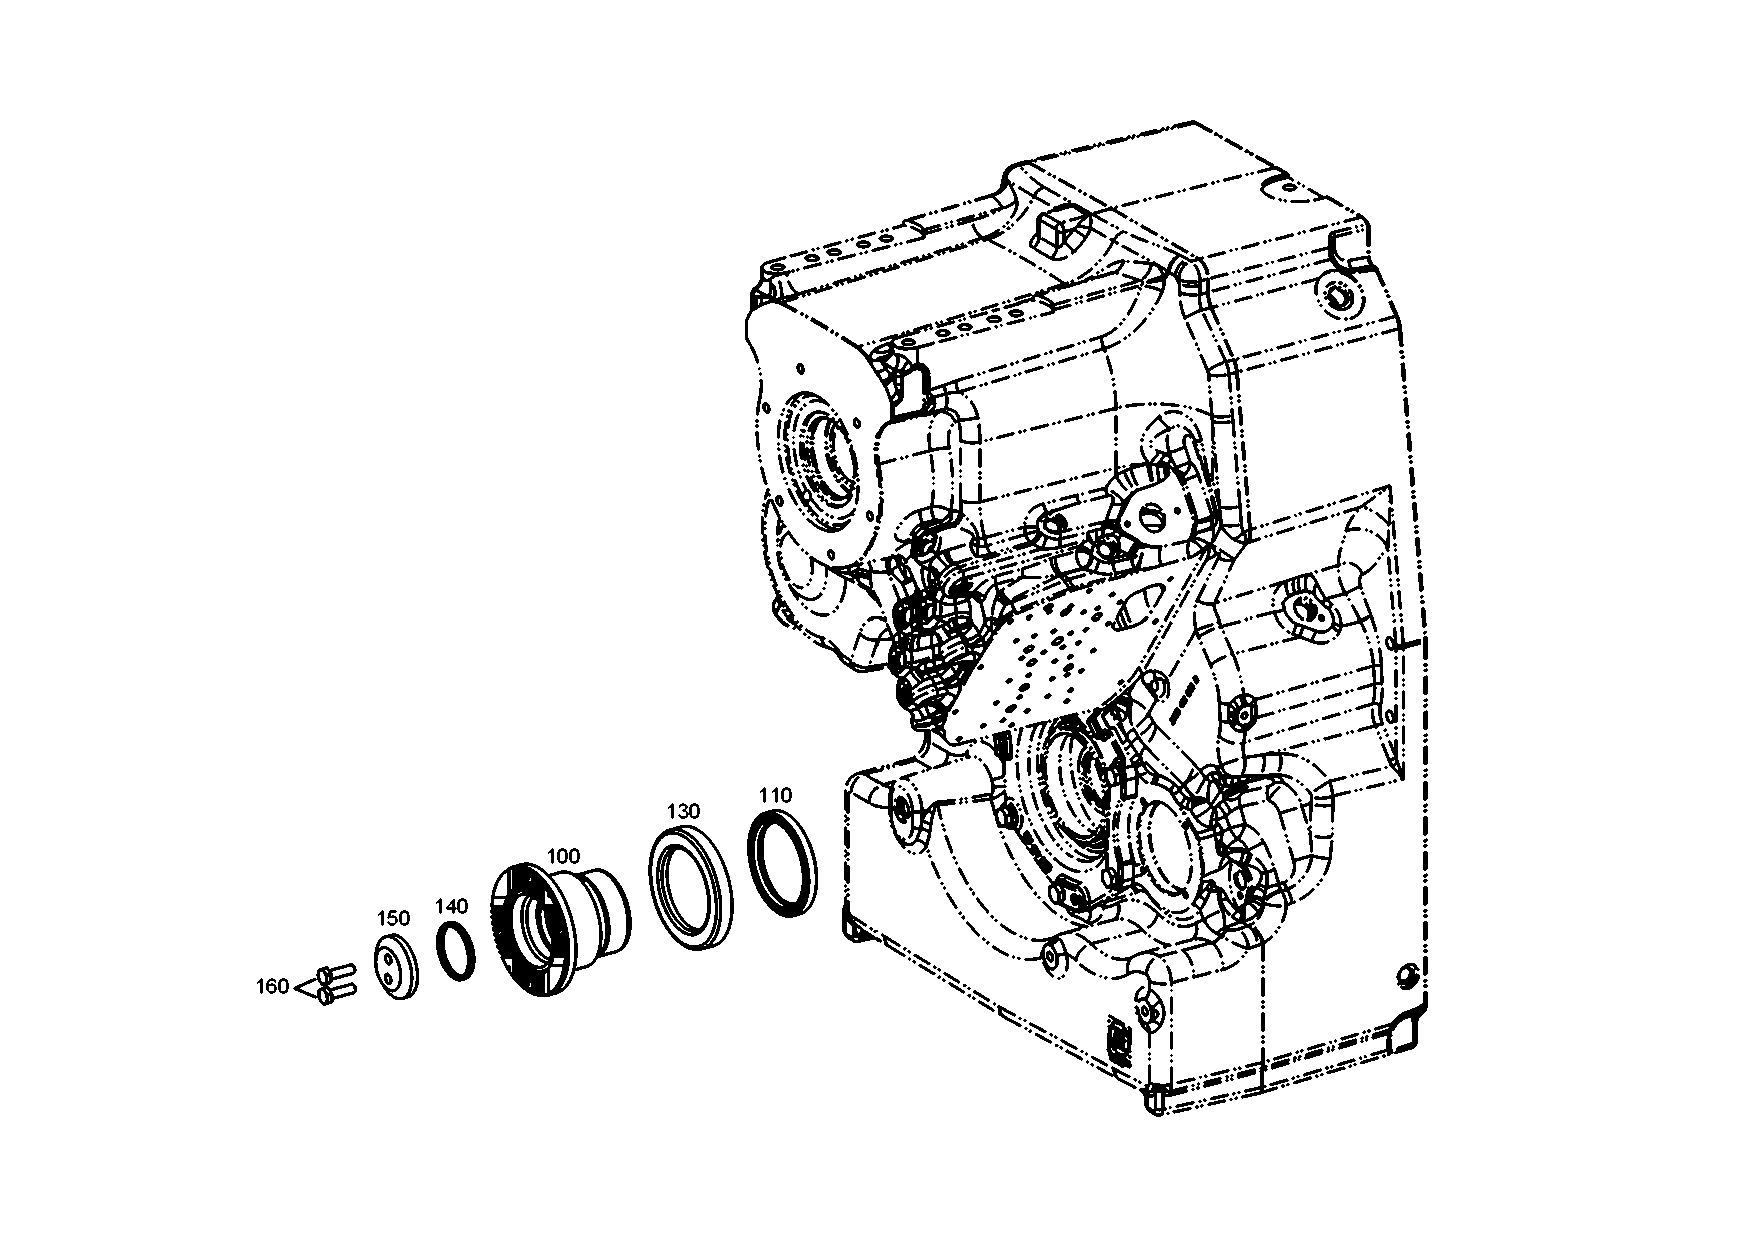 drawing for MOXY TRUCKS AS 352010 - SHAFT SEAL (figure 4)